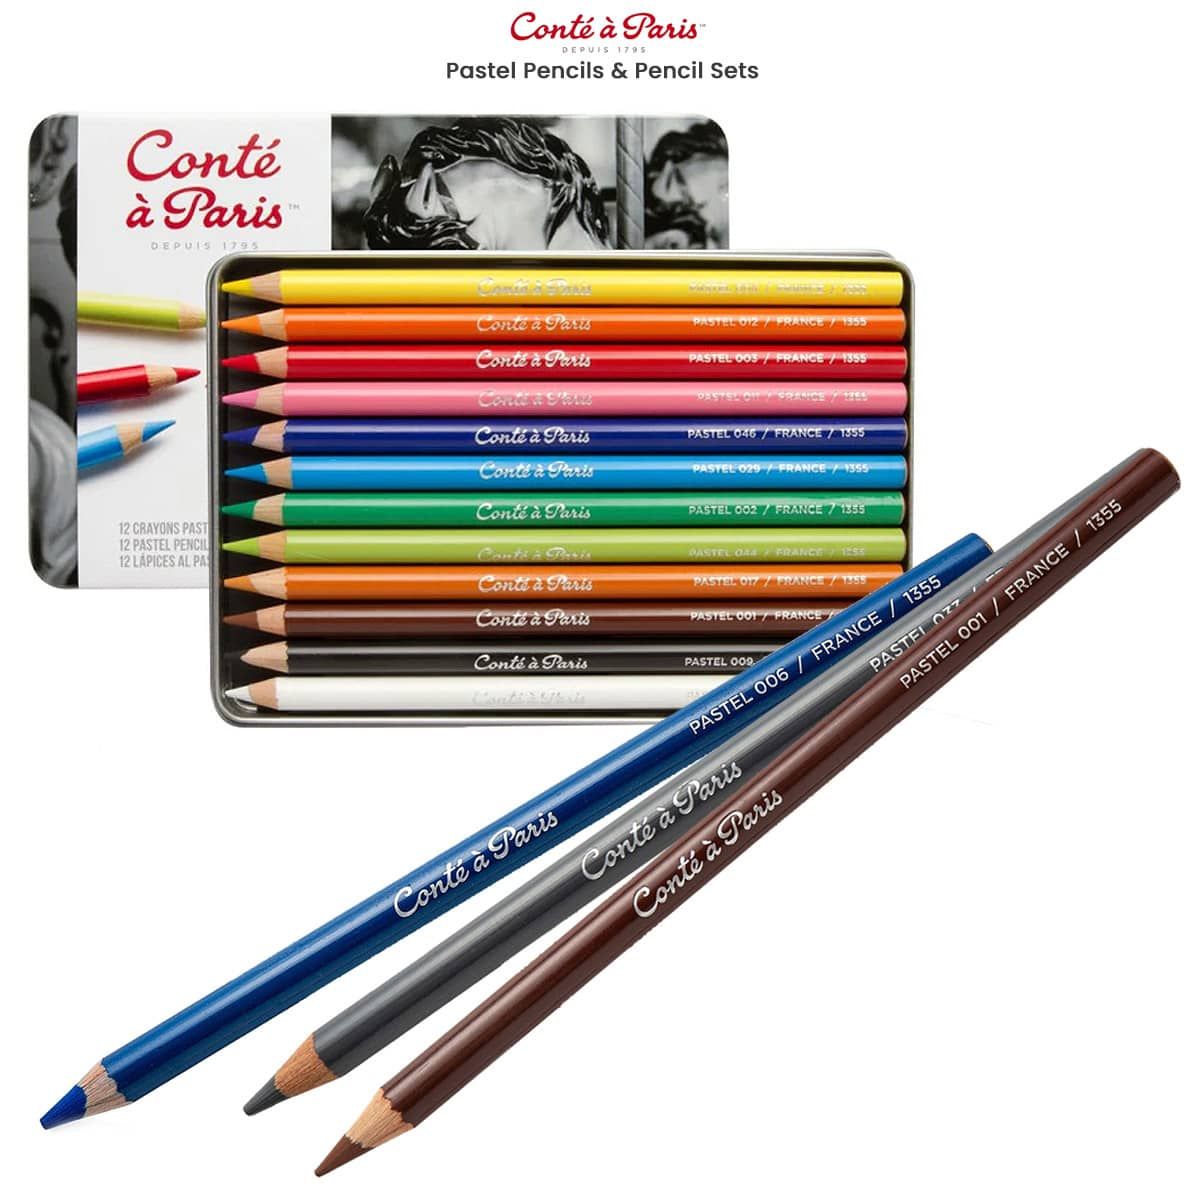 Faber-Castell World Colors Colored Pencil School Pack - Traditional & Skin  Tone Colored Pencils - 300 Coloring Pencils and 25 Pencil Sharpeners